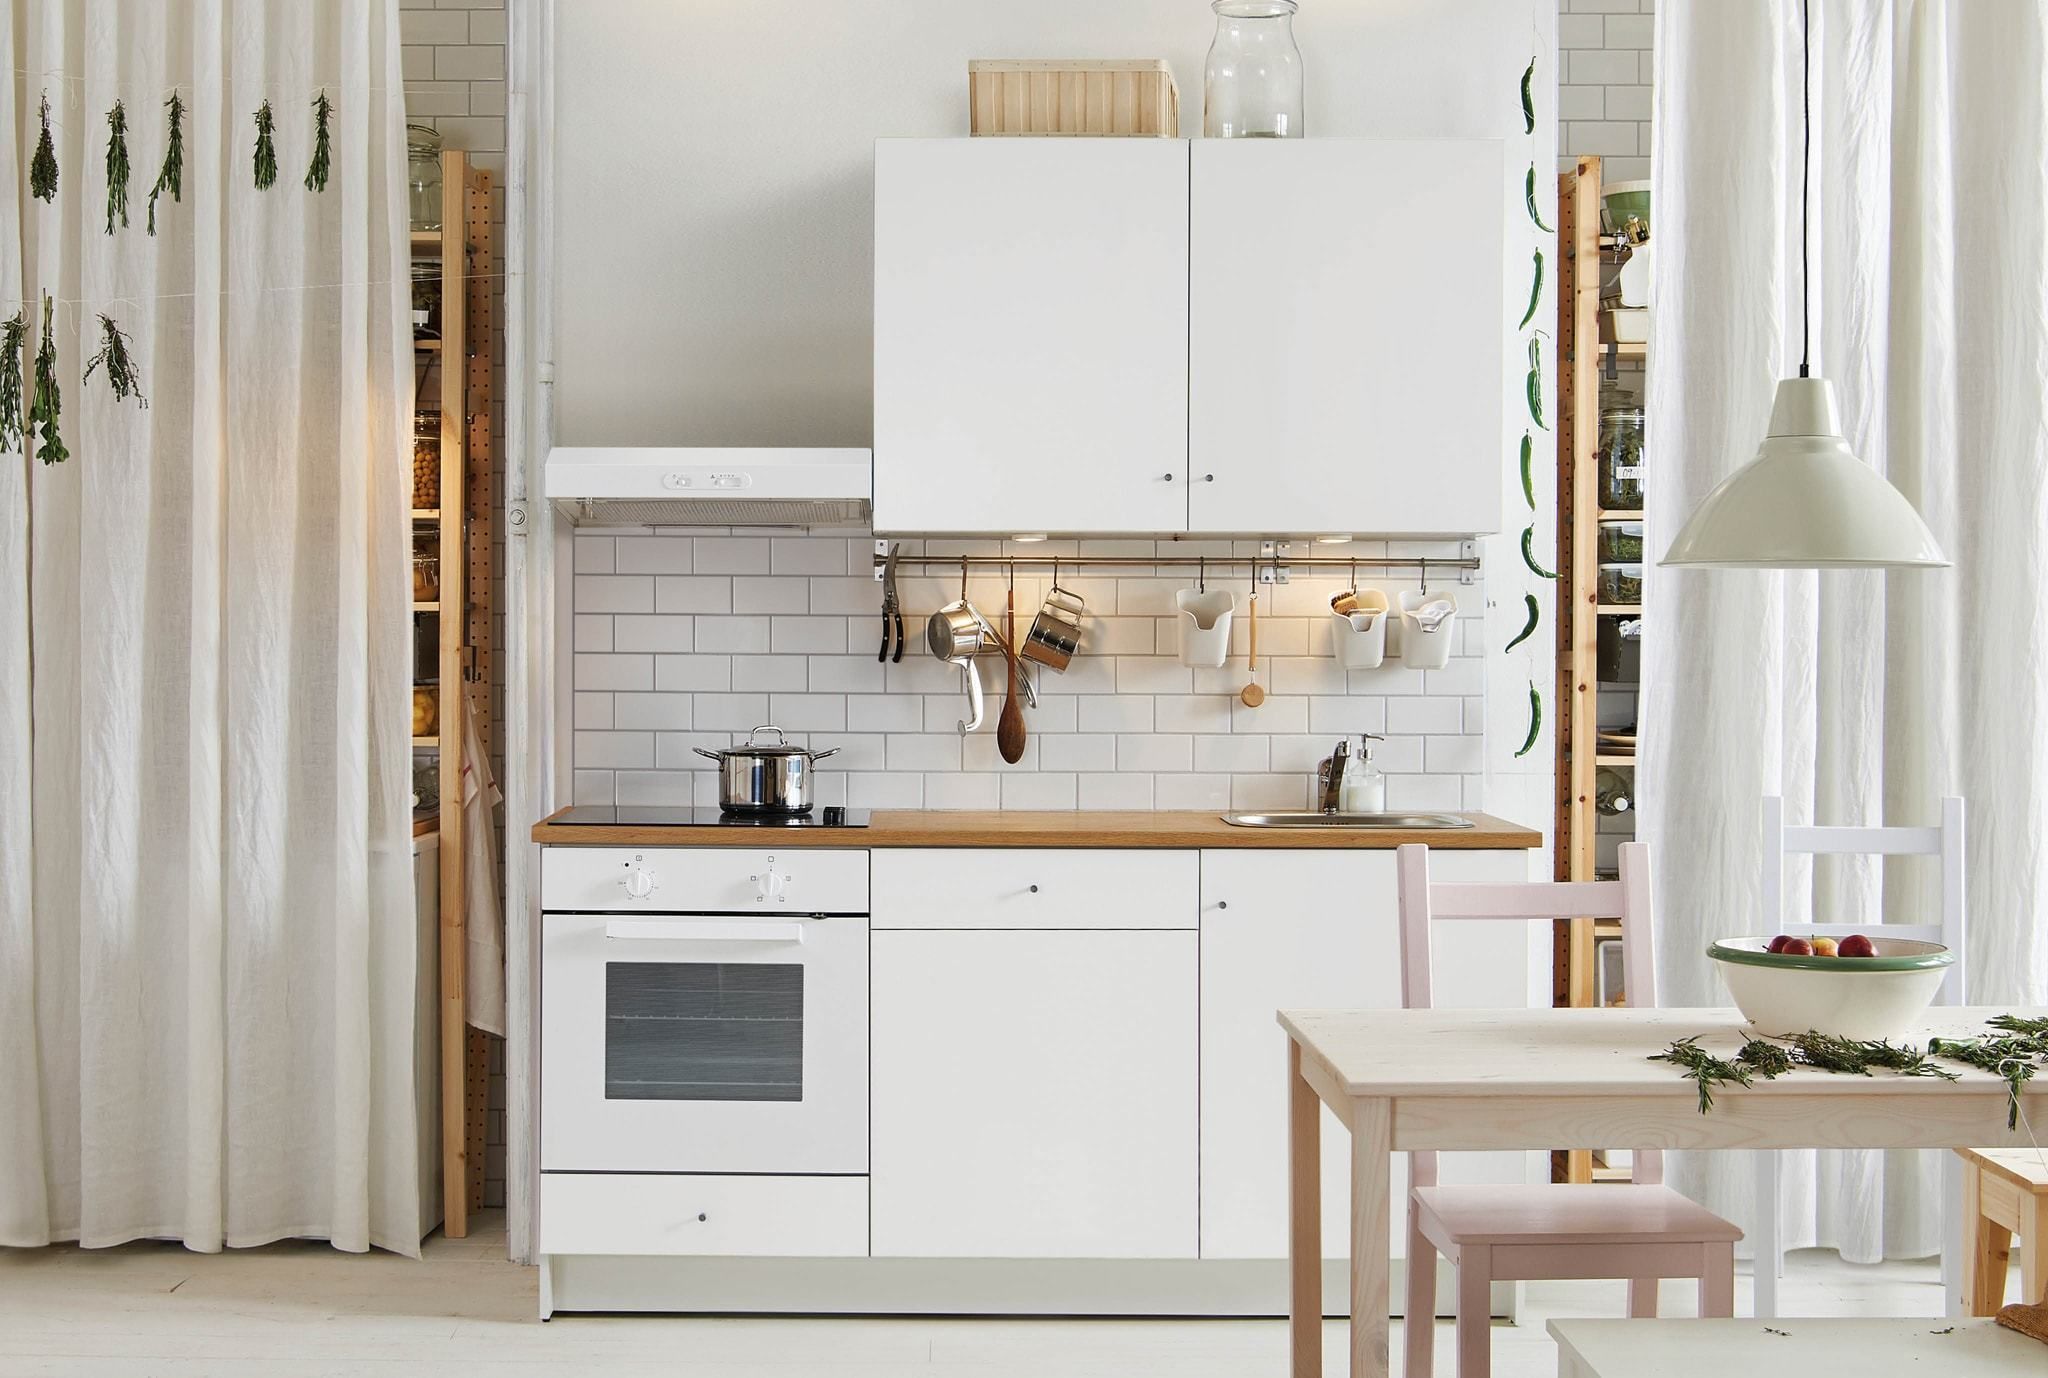 IKEA's New Kitchen Line Is so Colorful—and Practical